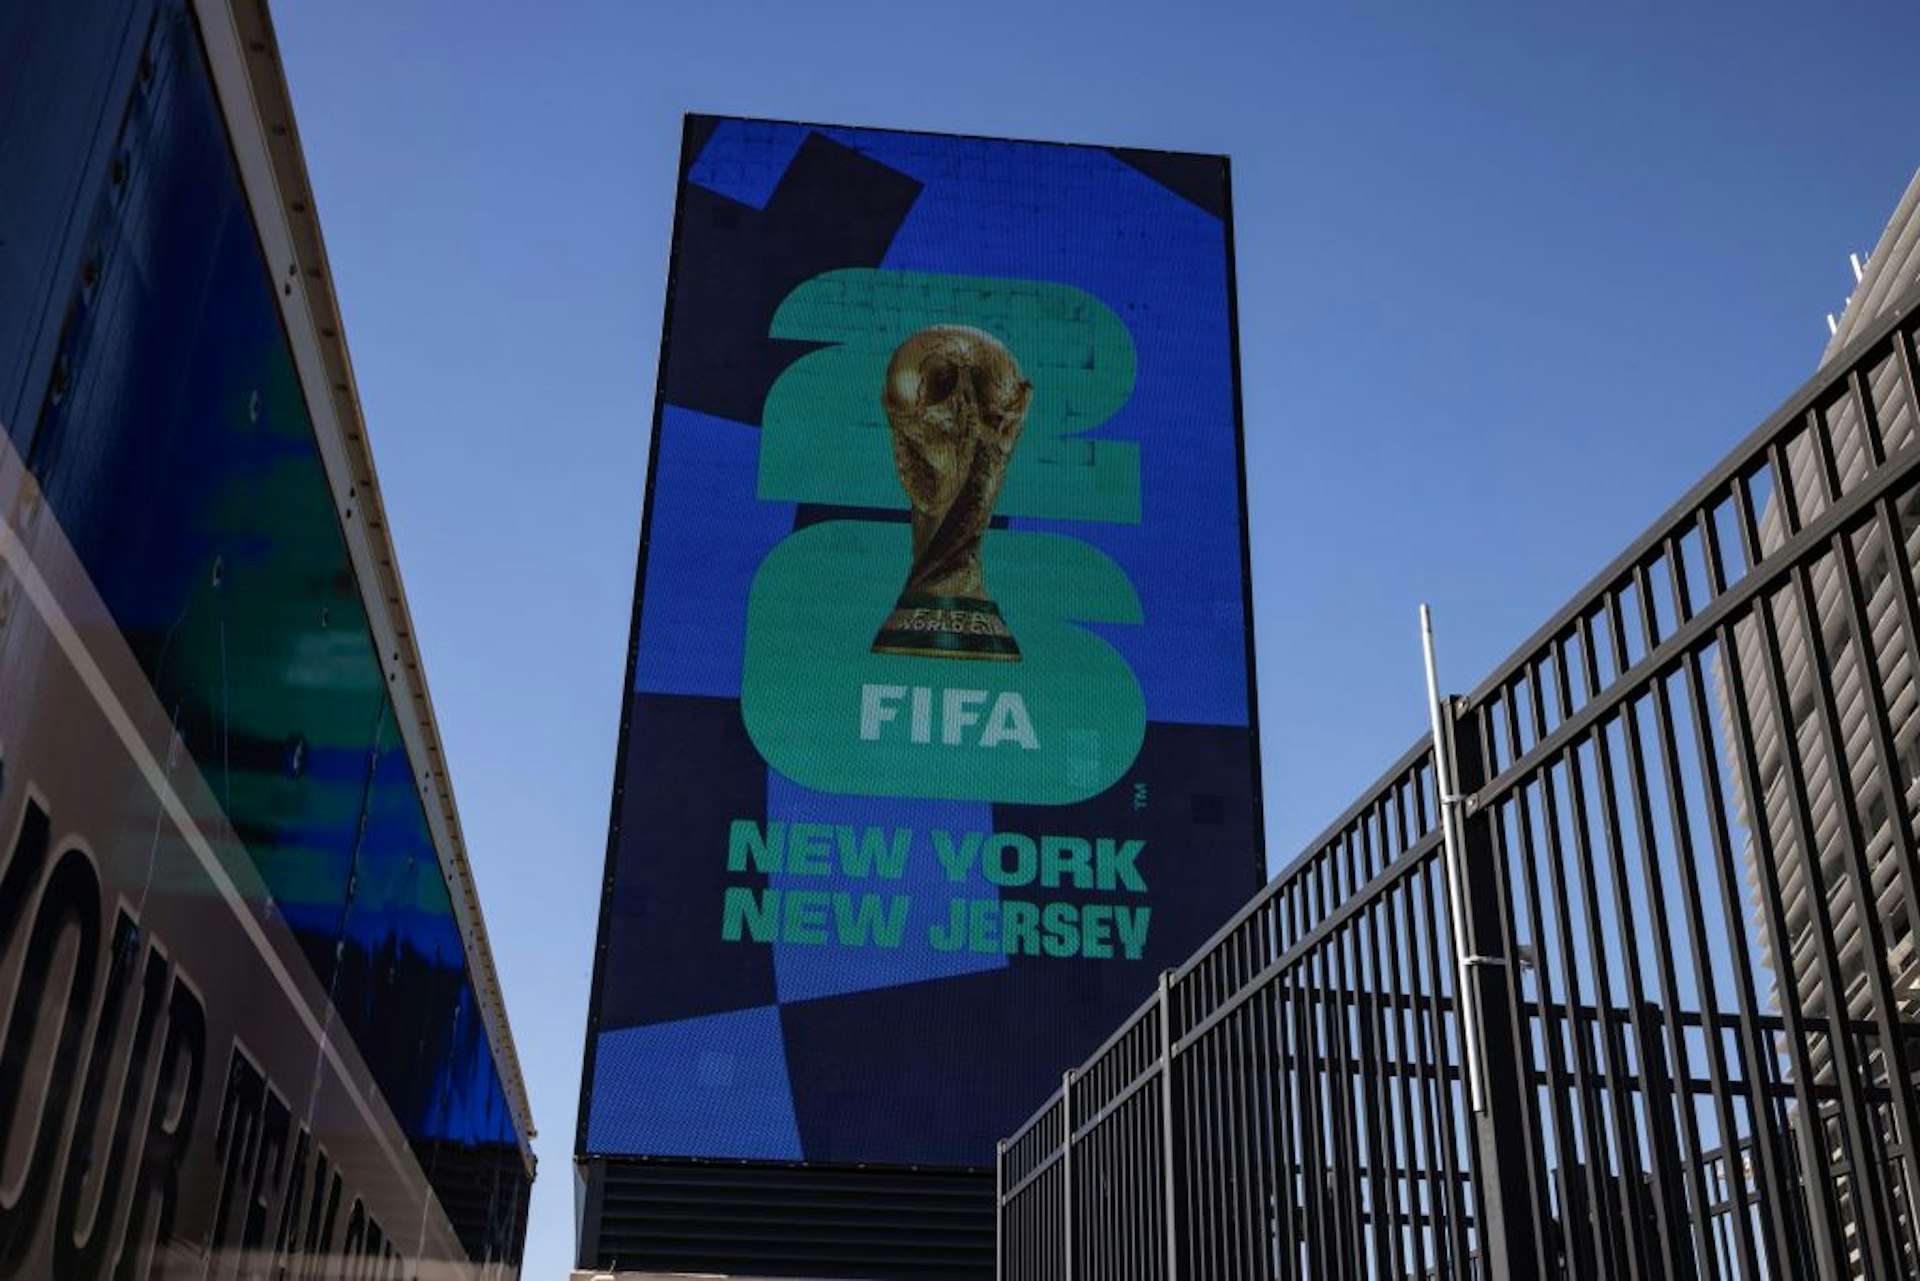 FIFA signage at MetLife Stadium in East Rutherford, New Jersey, US. 